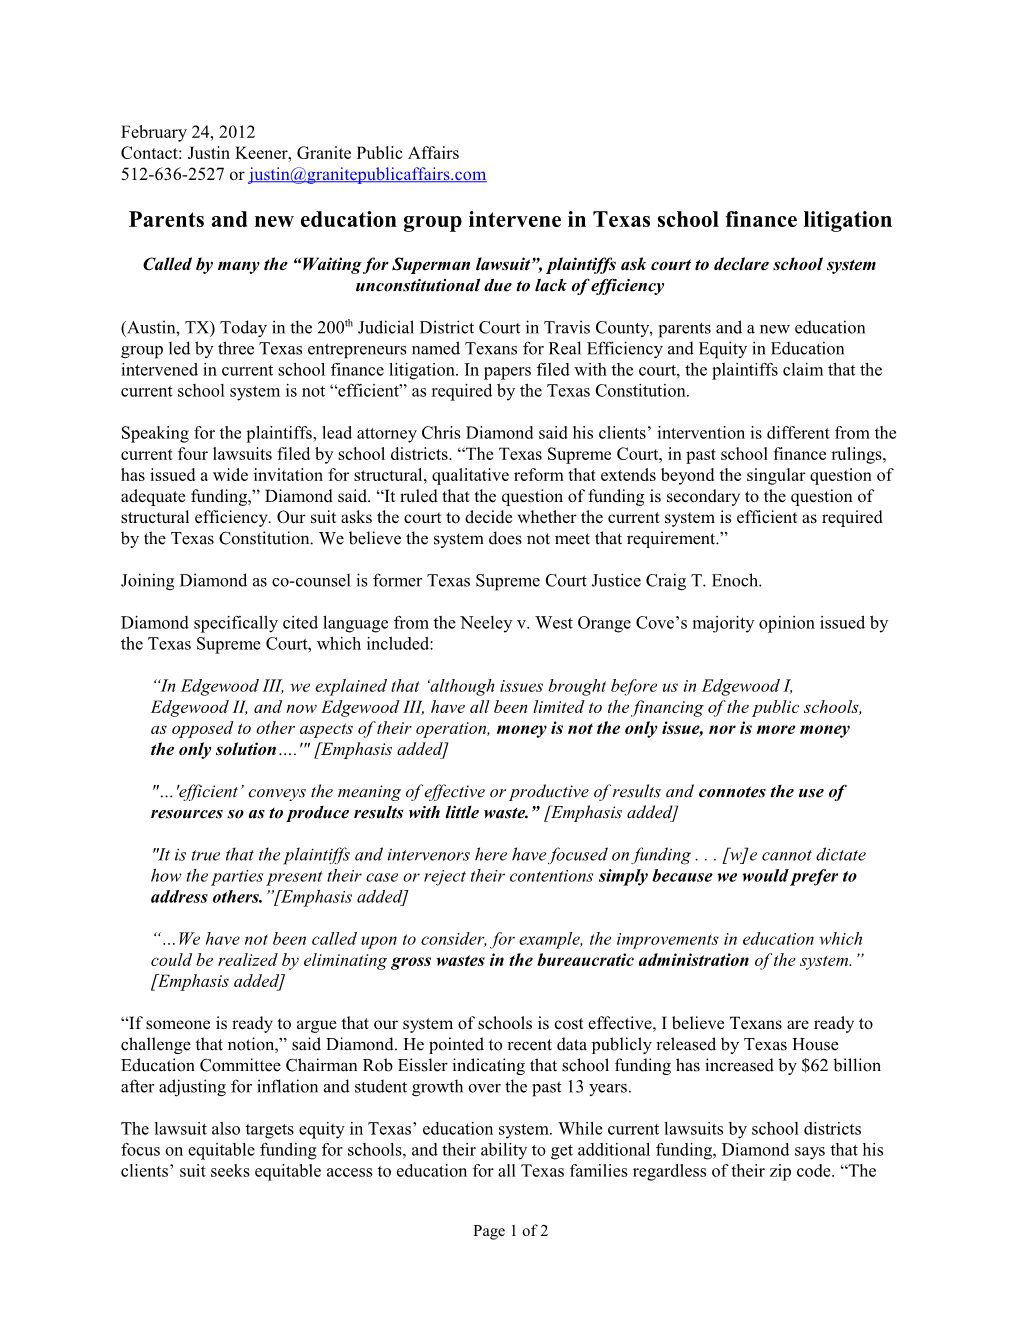 Parents and New Education Group Intervene in Texas School Finance Litigation